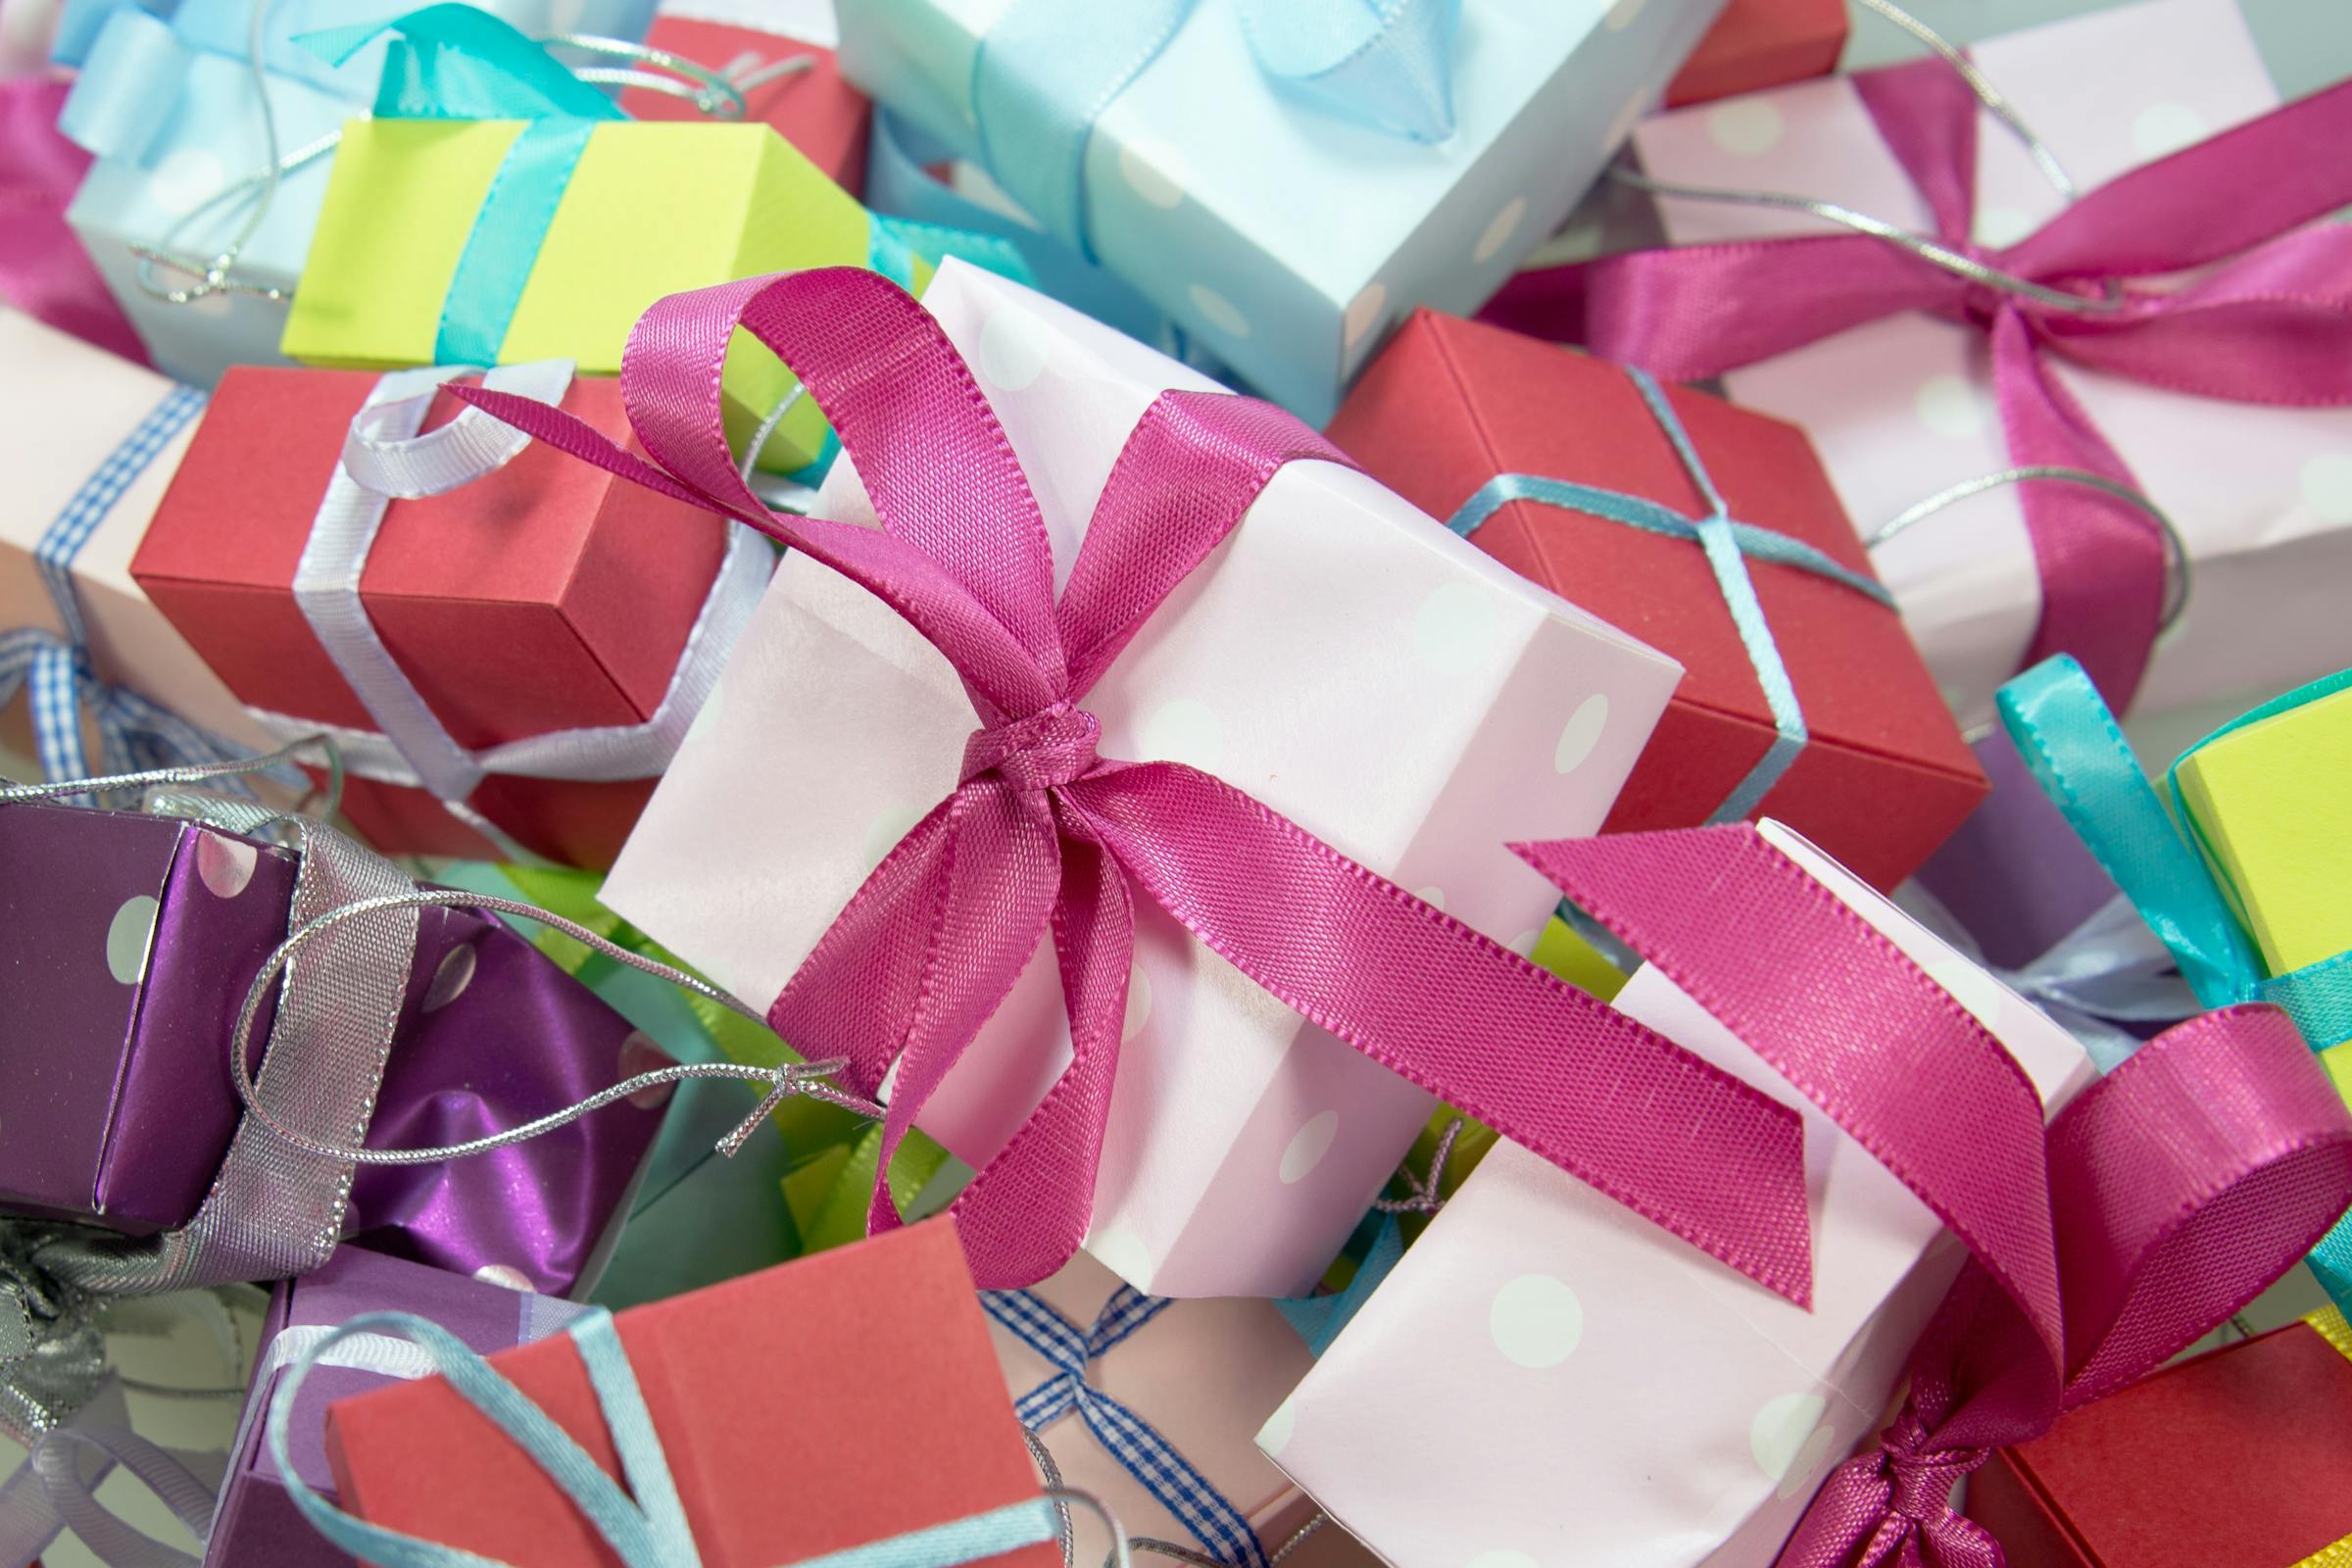 Colorful presents